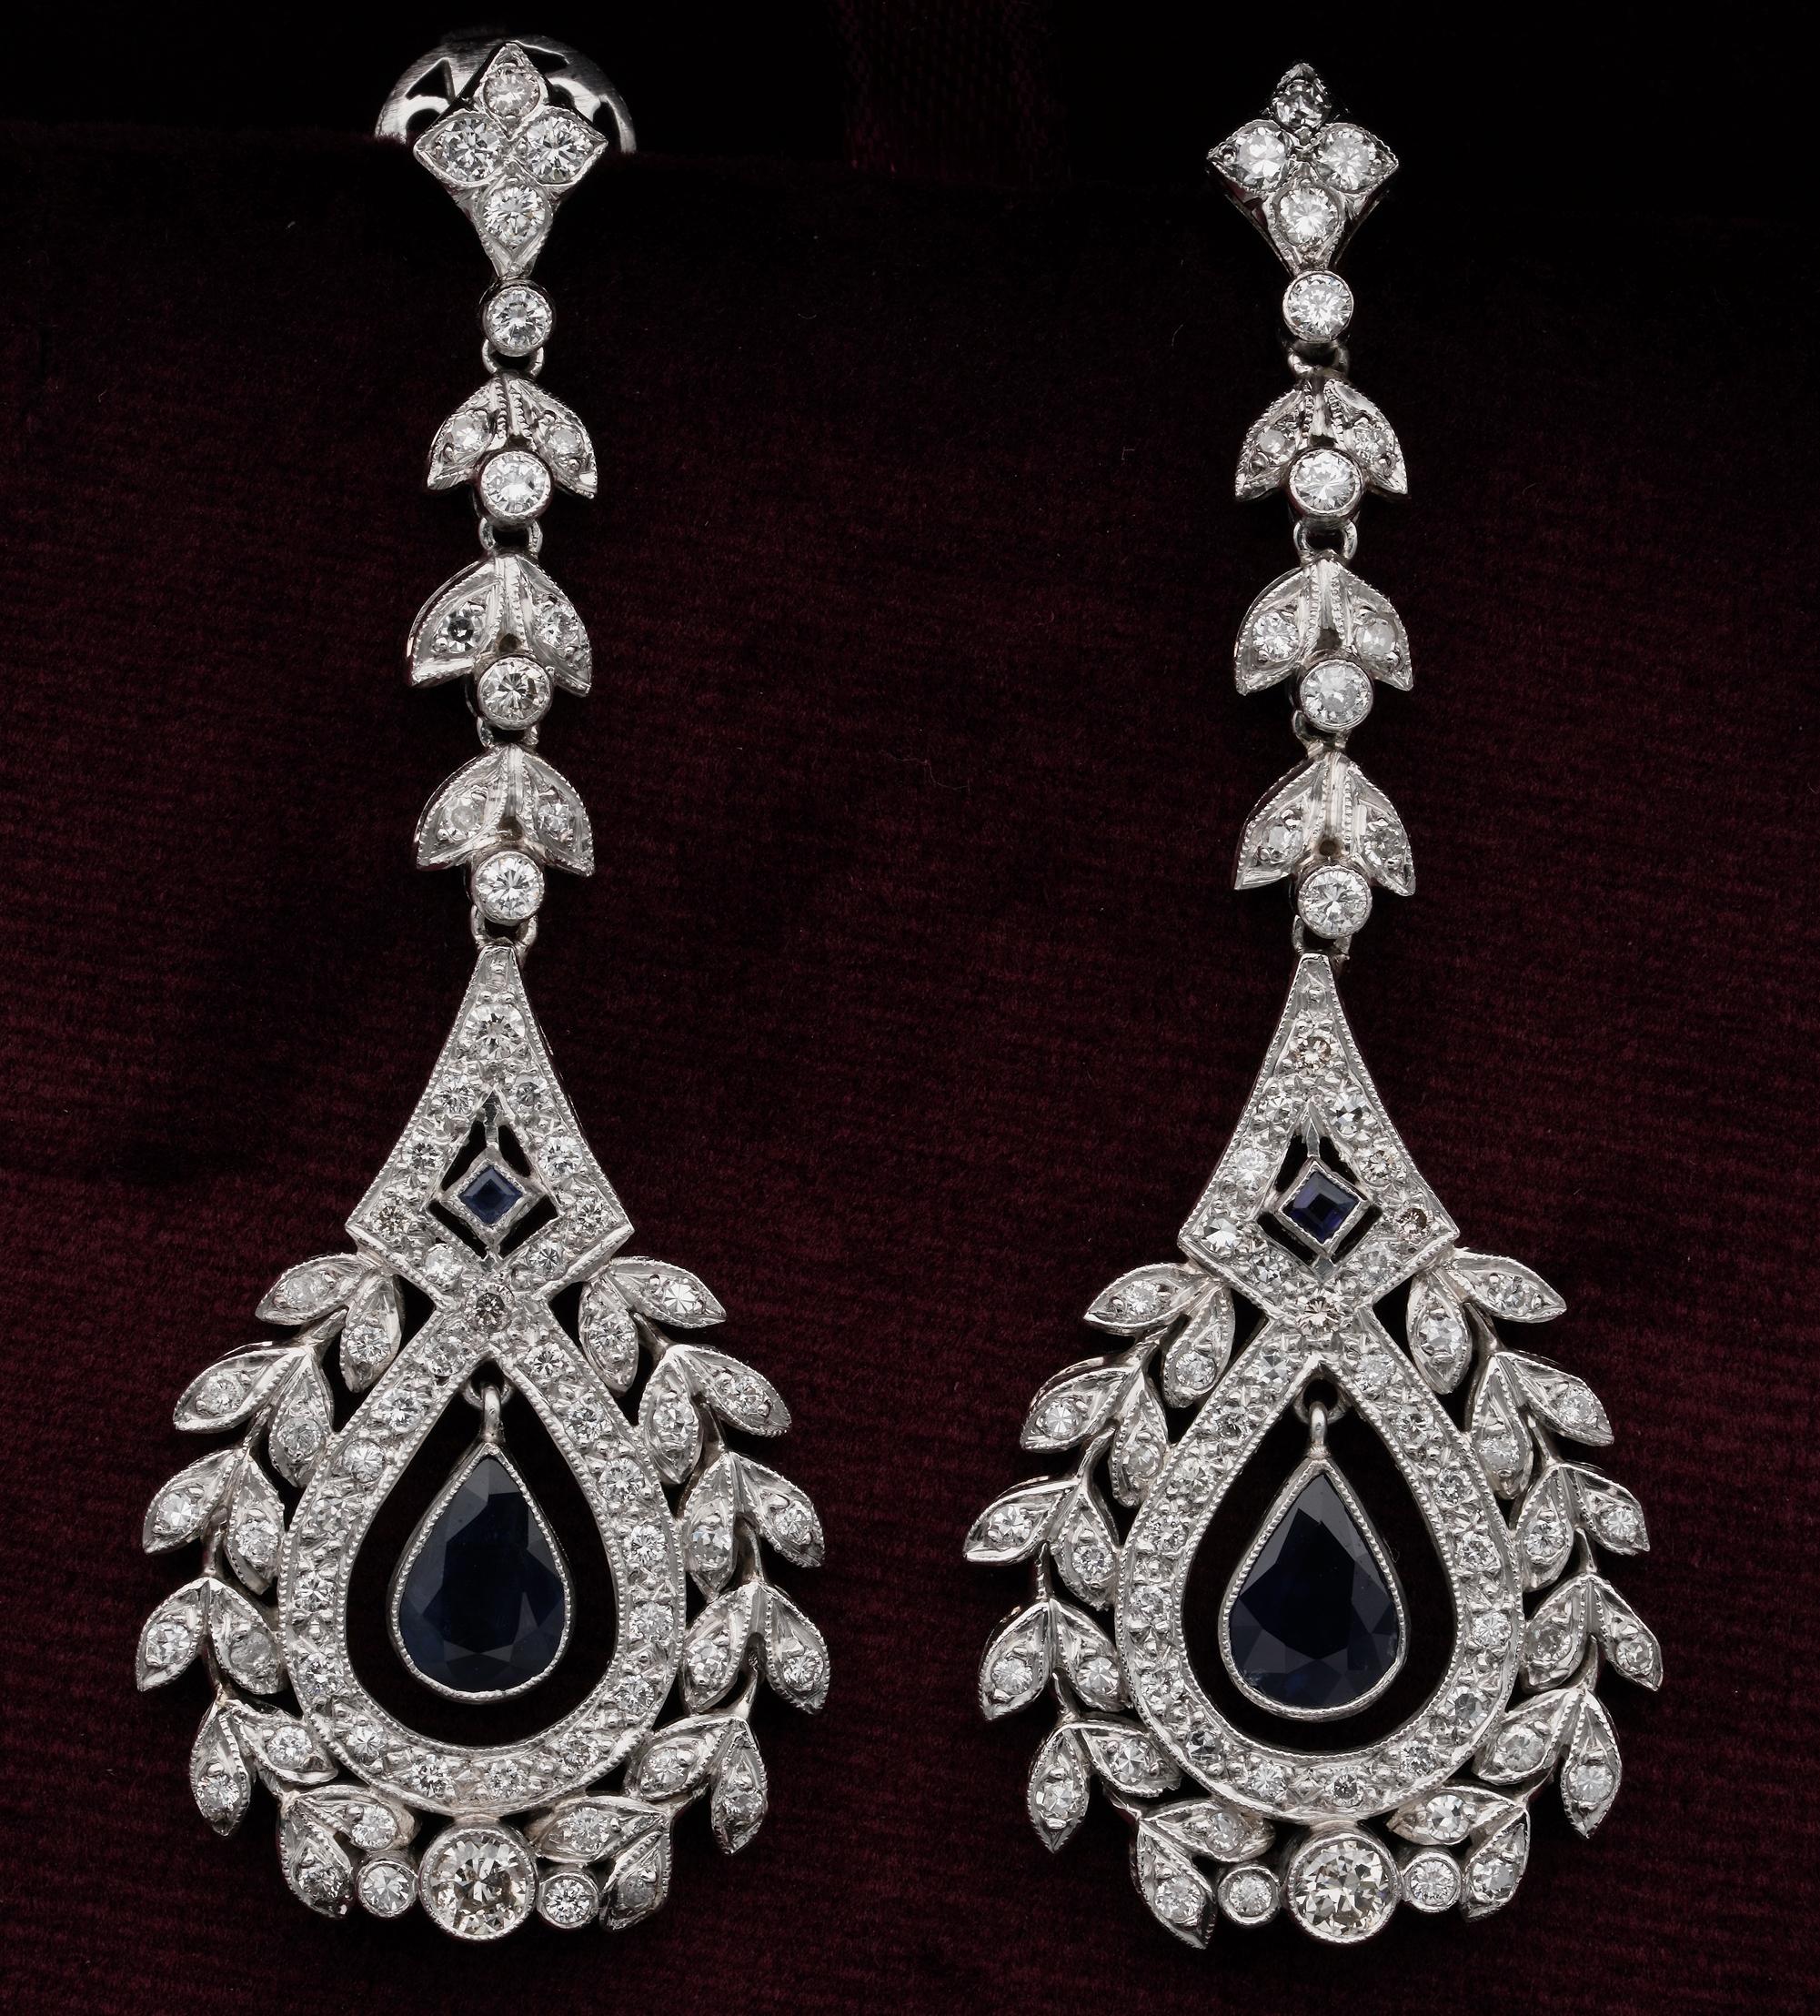 Fantastic pair of Edwardian period long drop earrings, 1905 ca.
Platinum hand made
Intricate art work catching the attention at first glance, long, sophisticate, detailed and sparkly modelled as a fine leaf work leading to a suspended wreath of